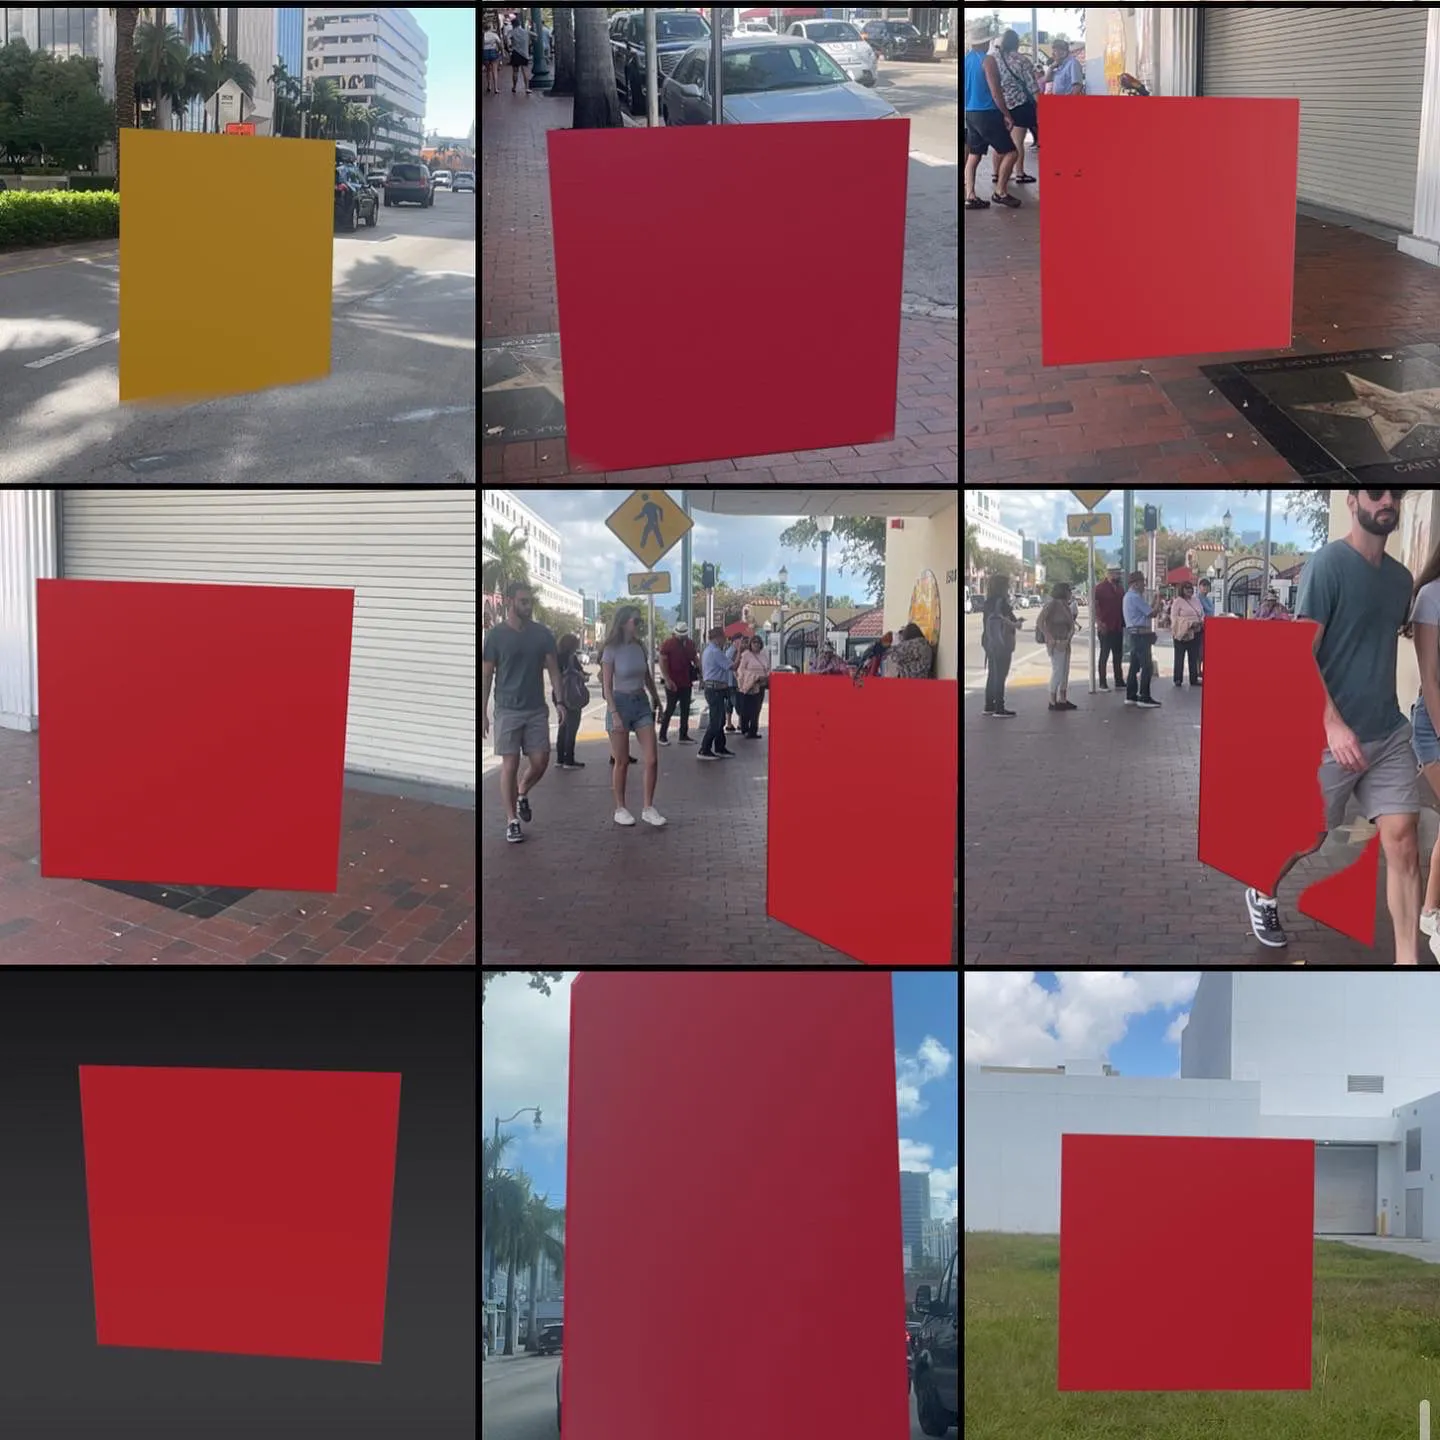 A collage of a red and yellow pixel positioned on open spaces on Miami with AR